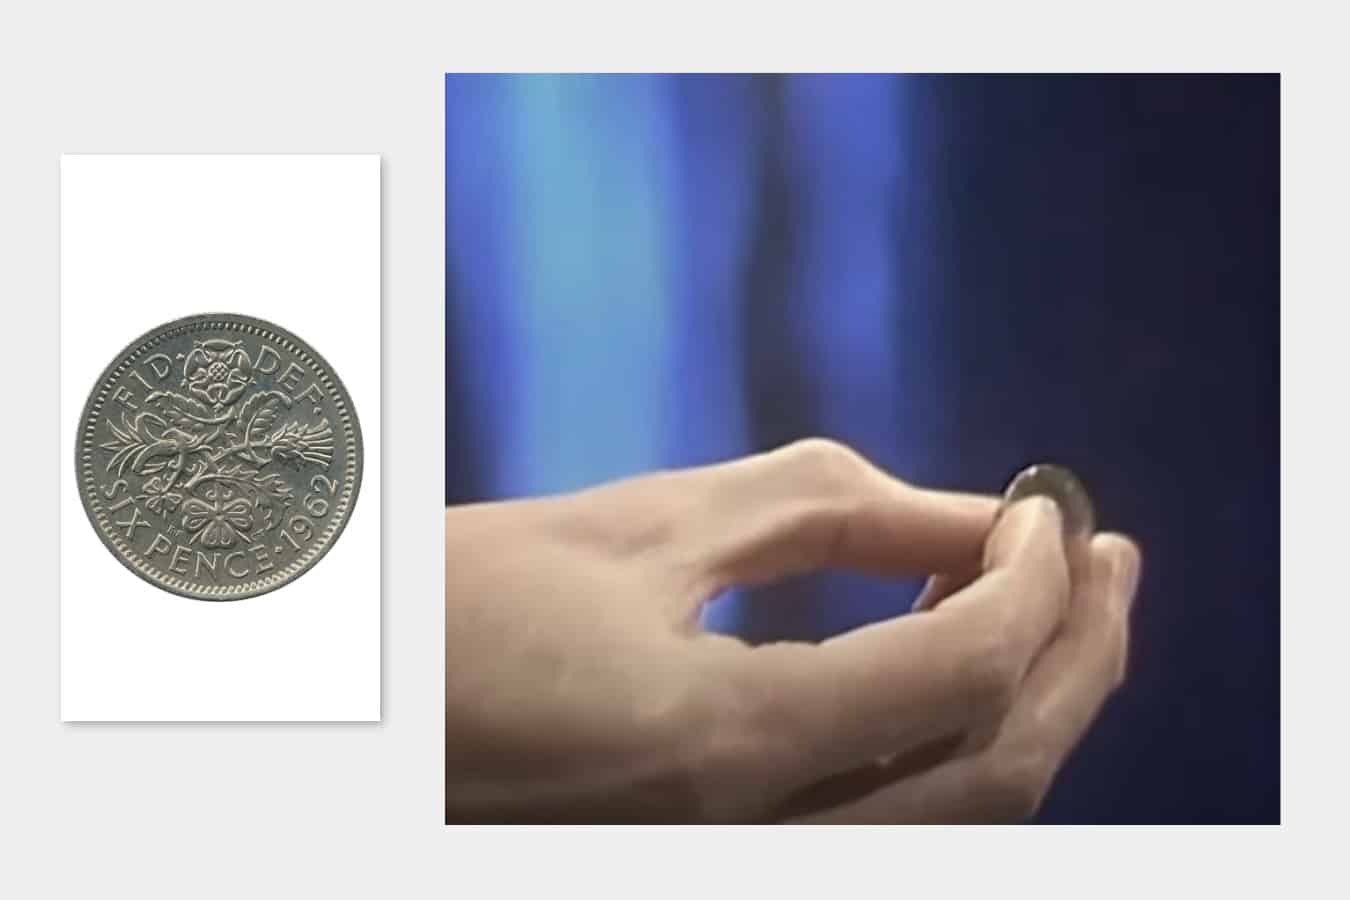 An English Sixpence coin that Brian uses as a guitar pick. Right - Brian showing the pick during an interview in 1978.